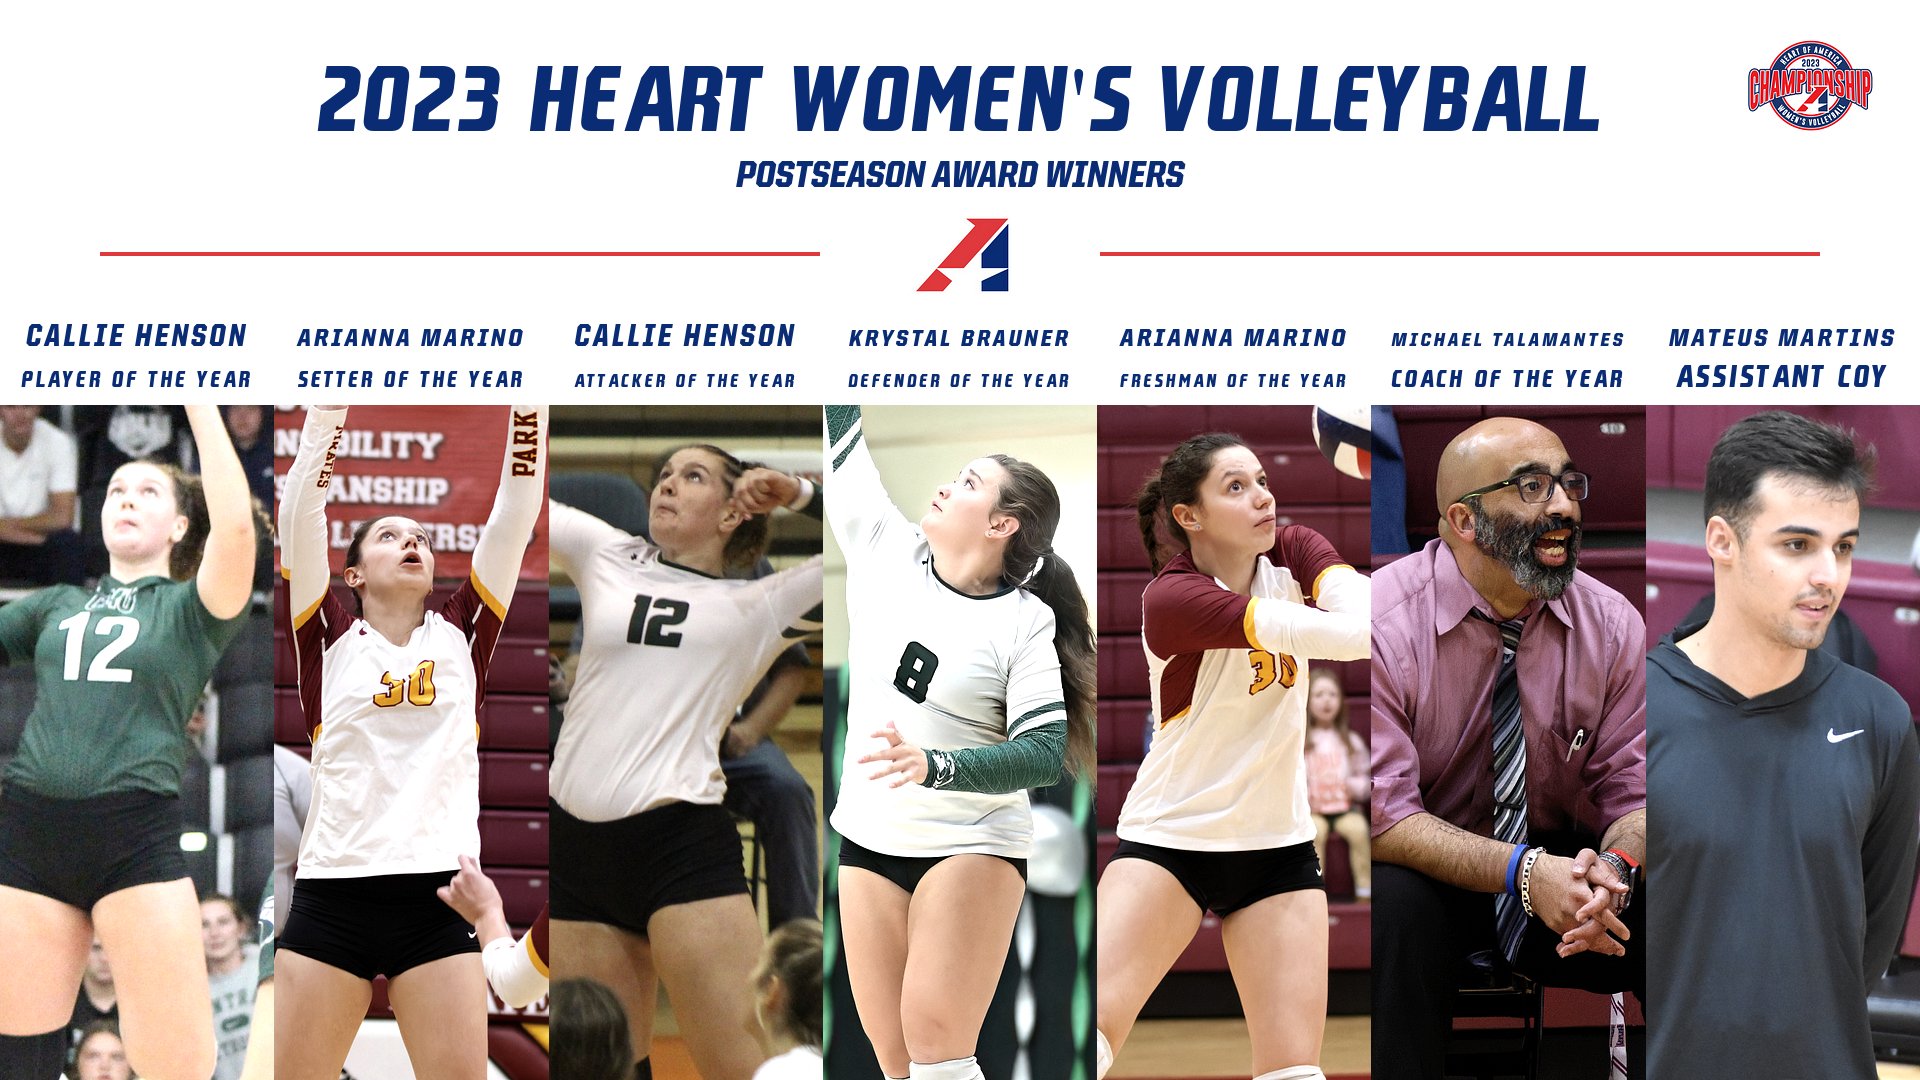 2023 Heart Women’s Volleyball All-Conference Teams and Postseason Awards Announced